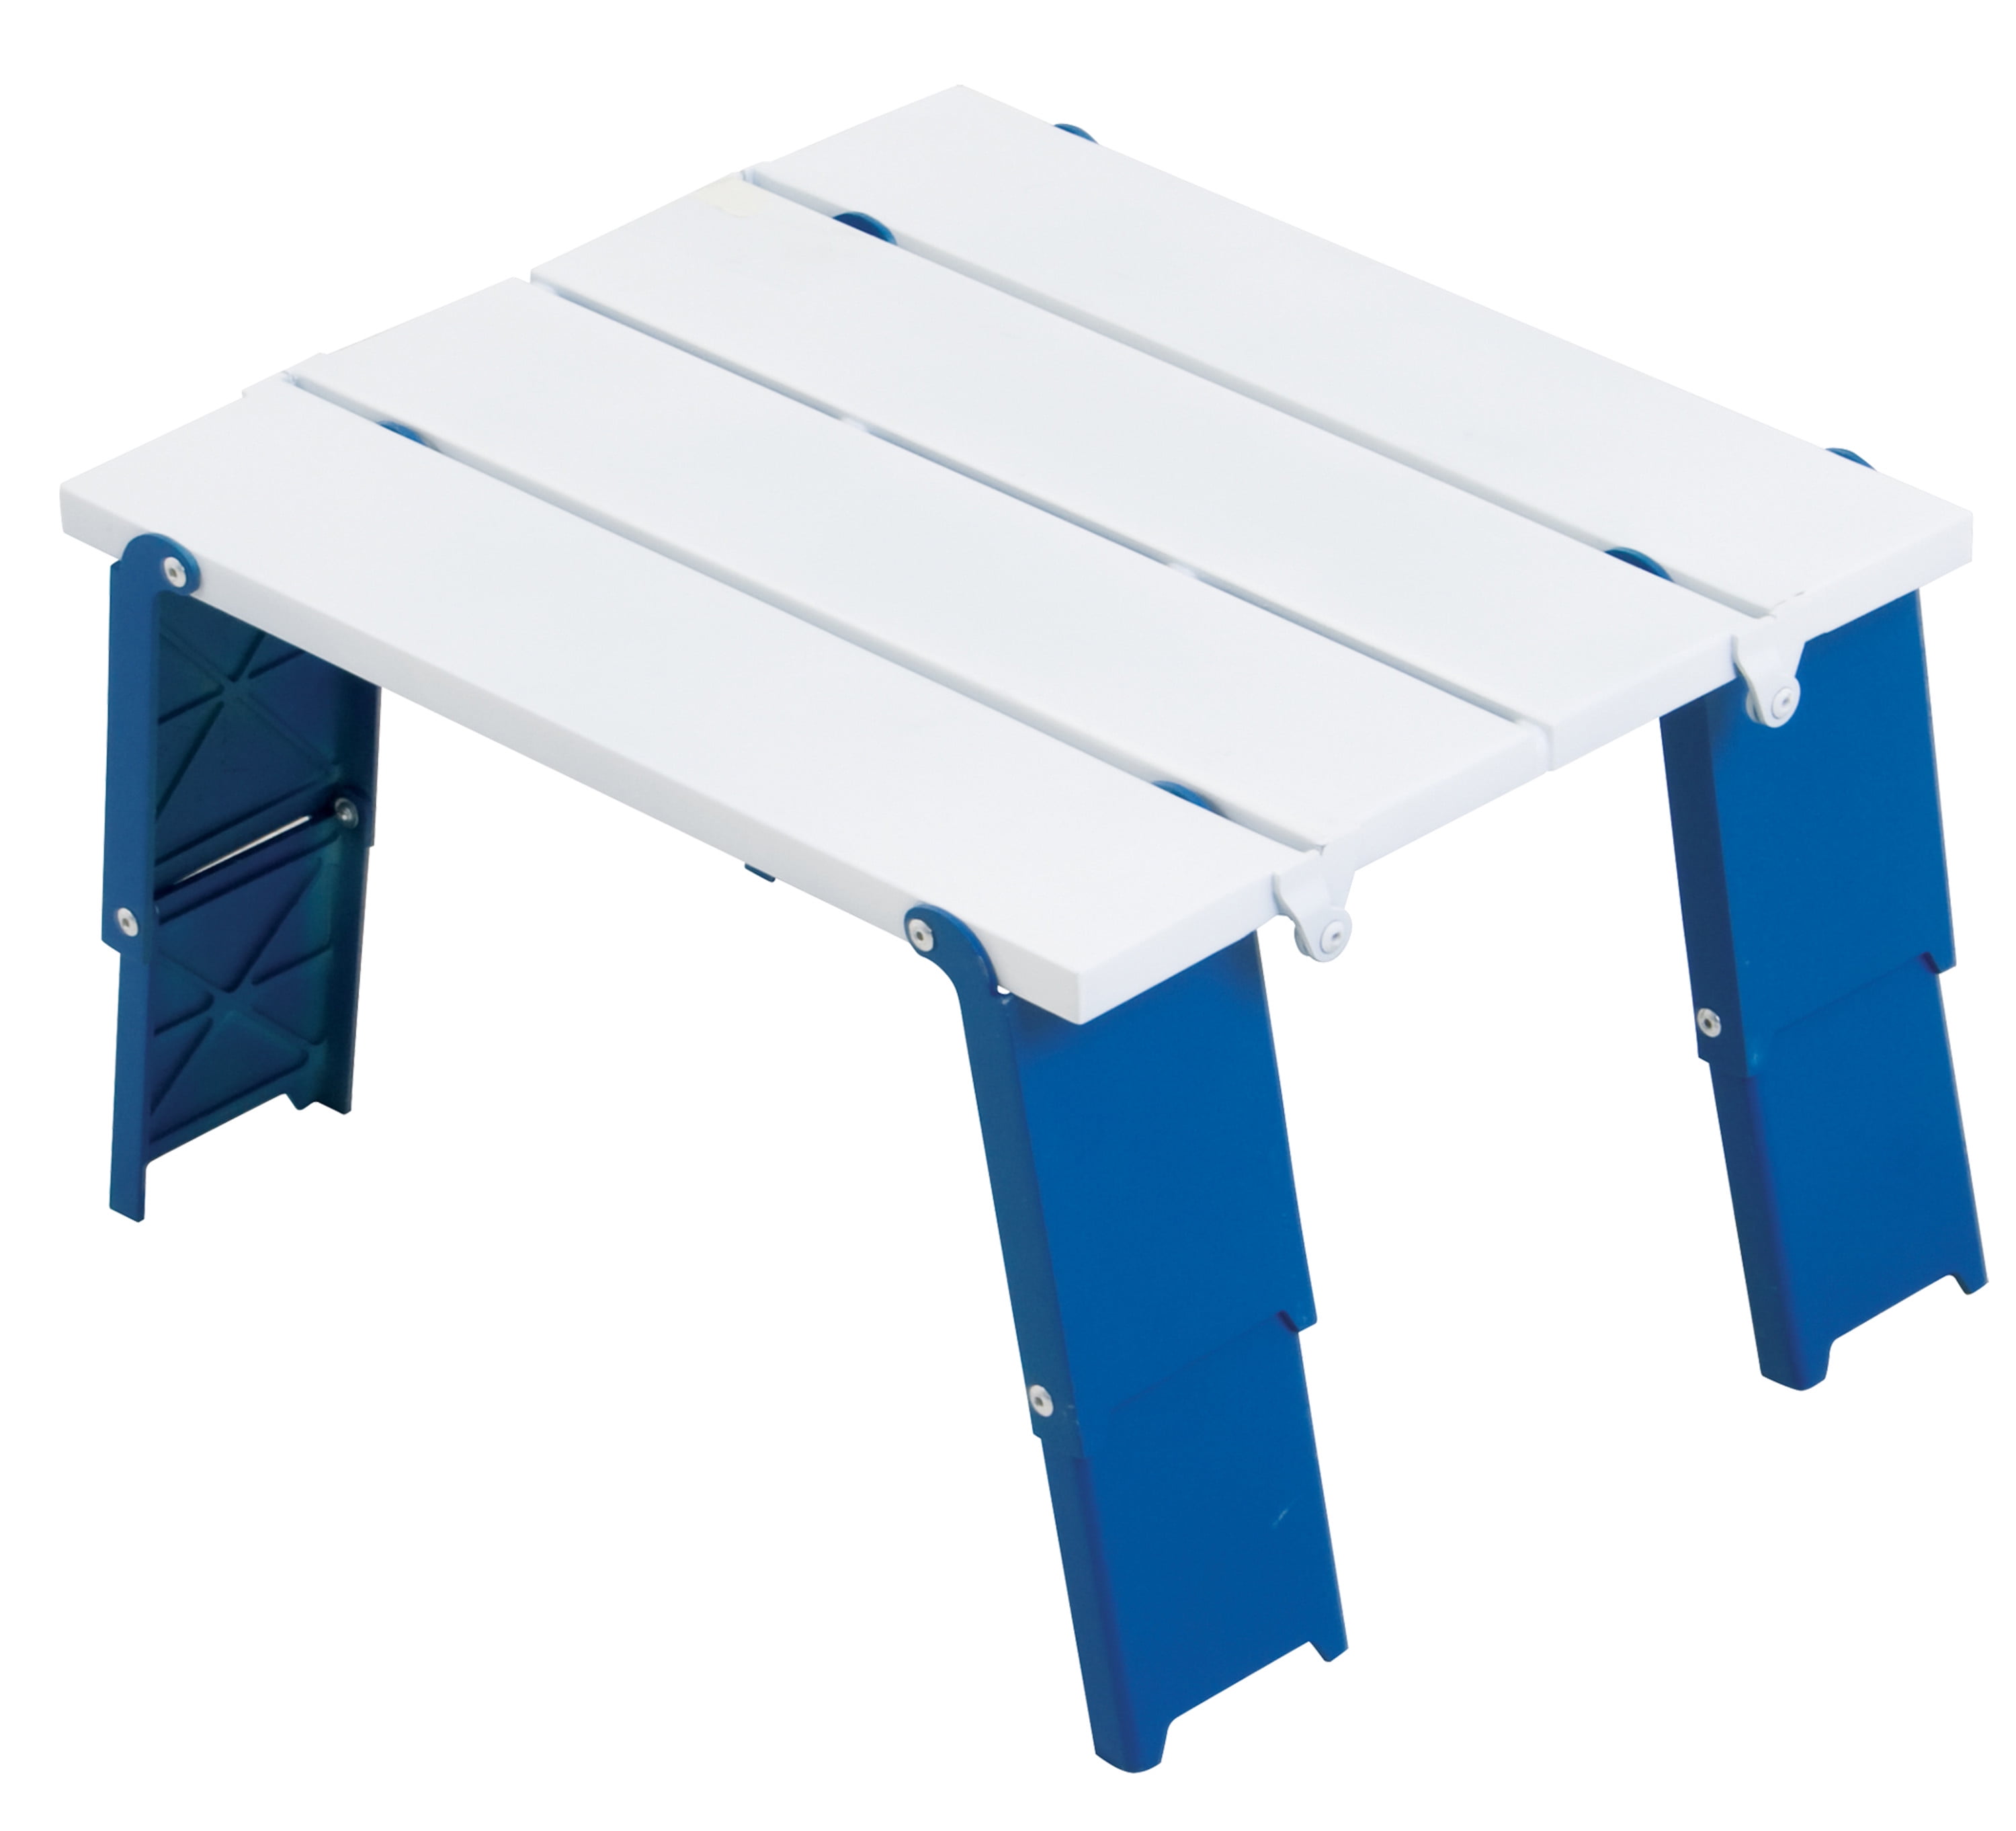 RIO Personal Beach Table, Foldable and Lightweight RIO Beach Table